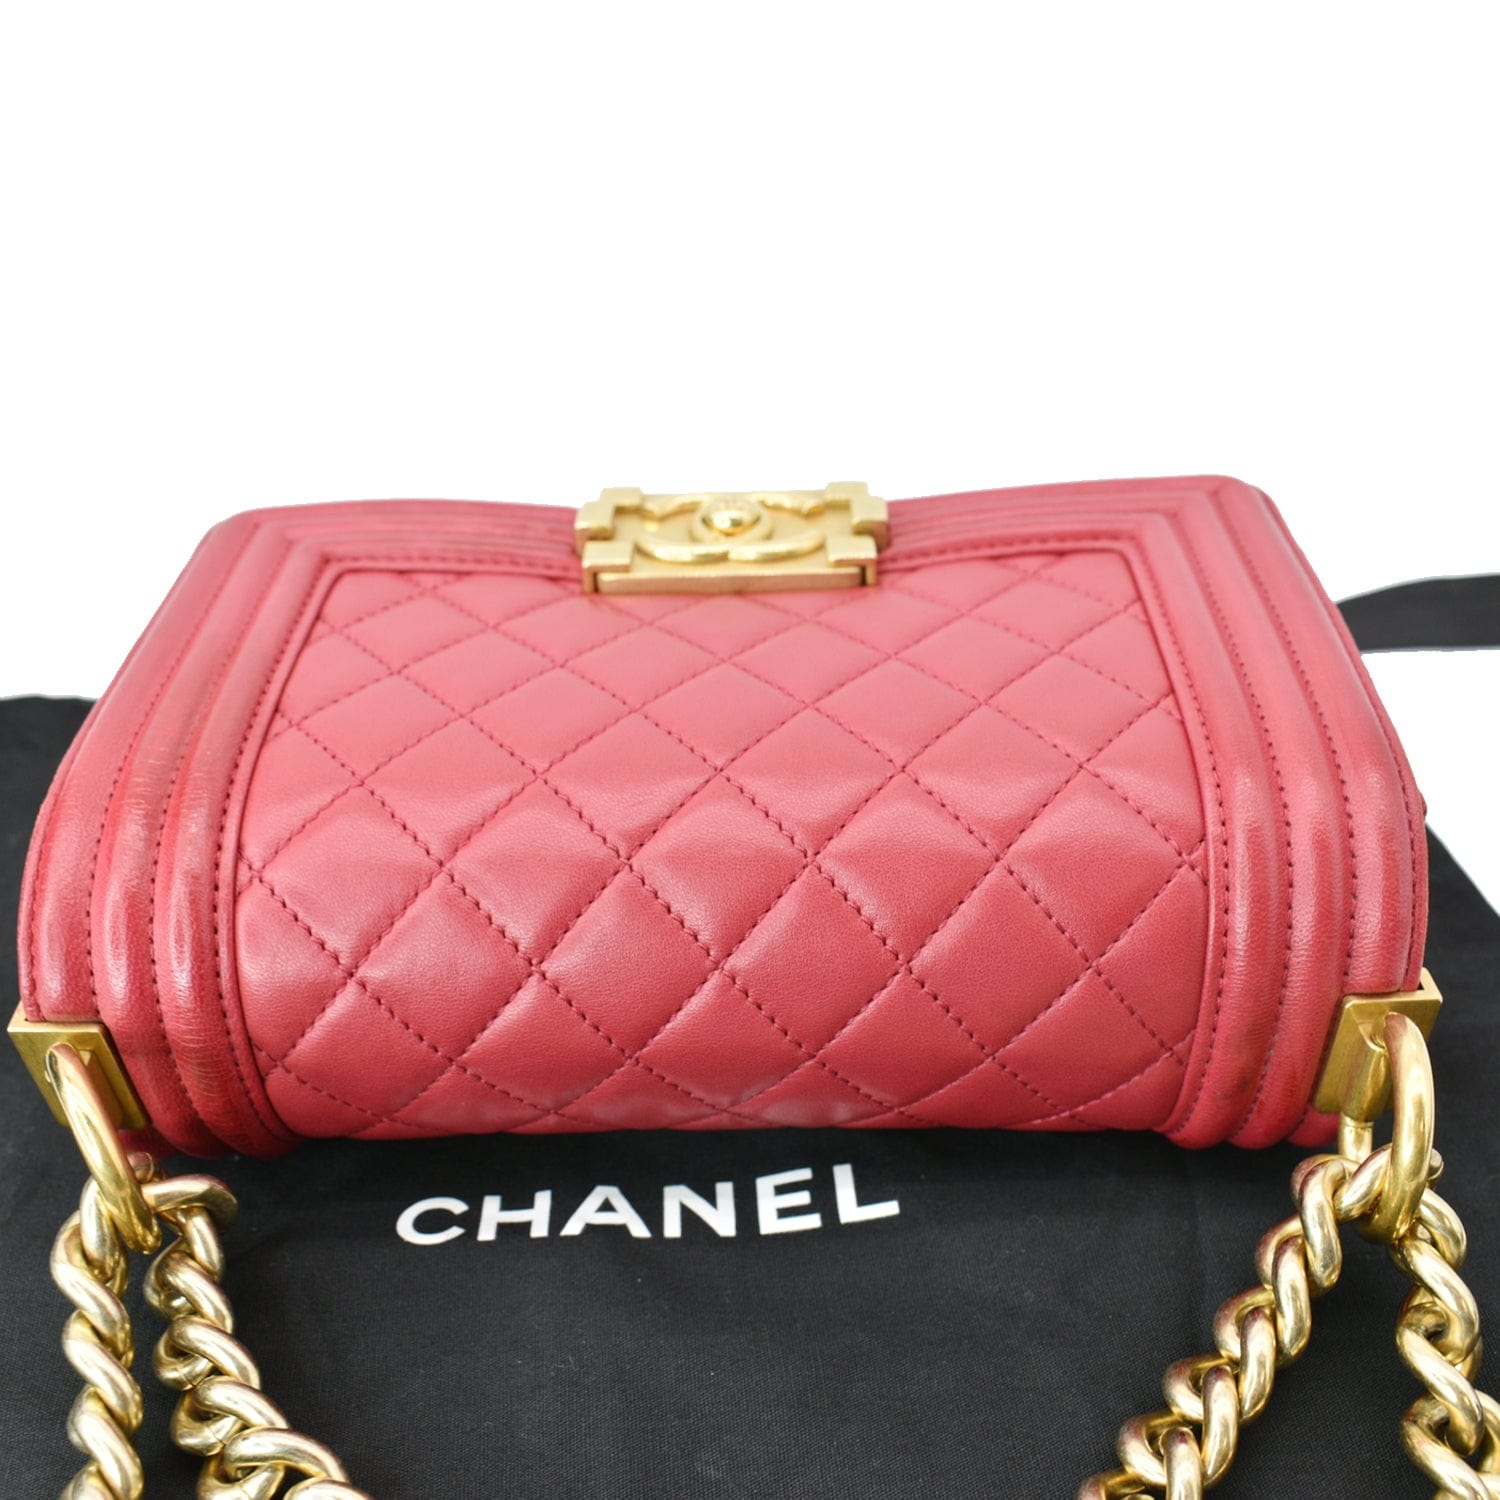 Chanel Metallic Bronze Quilted Leather Classic Flap Shopping Tote